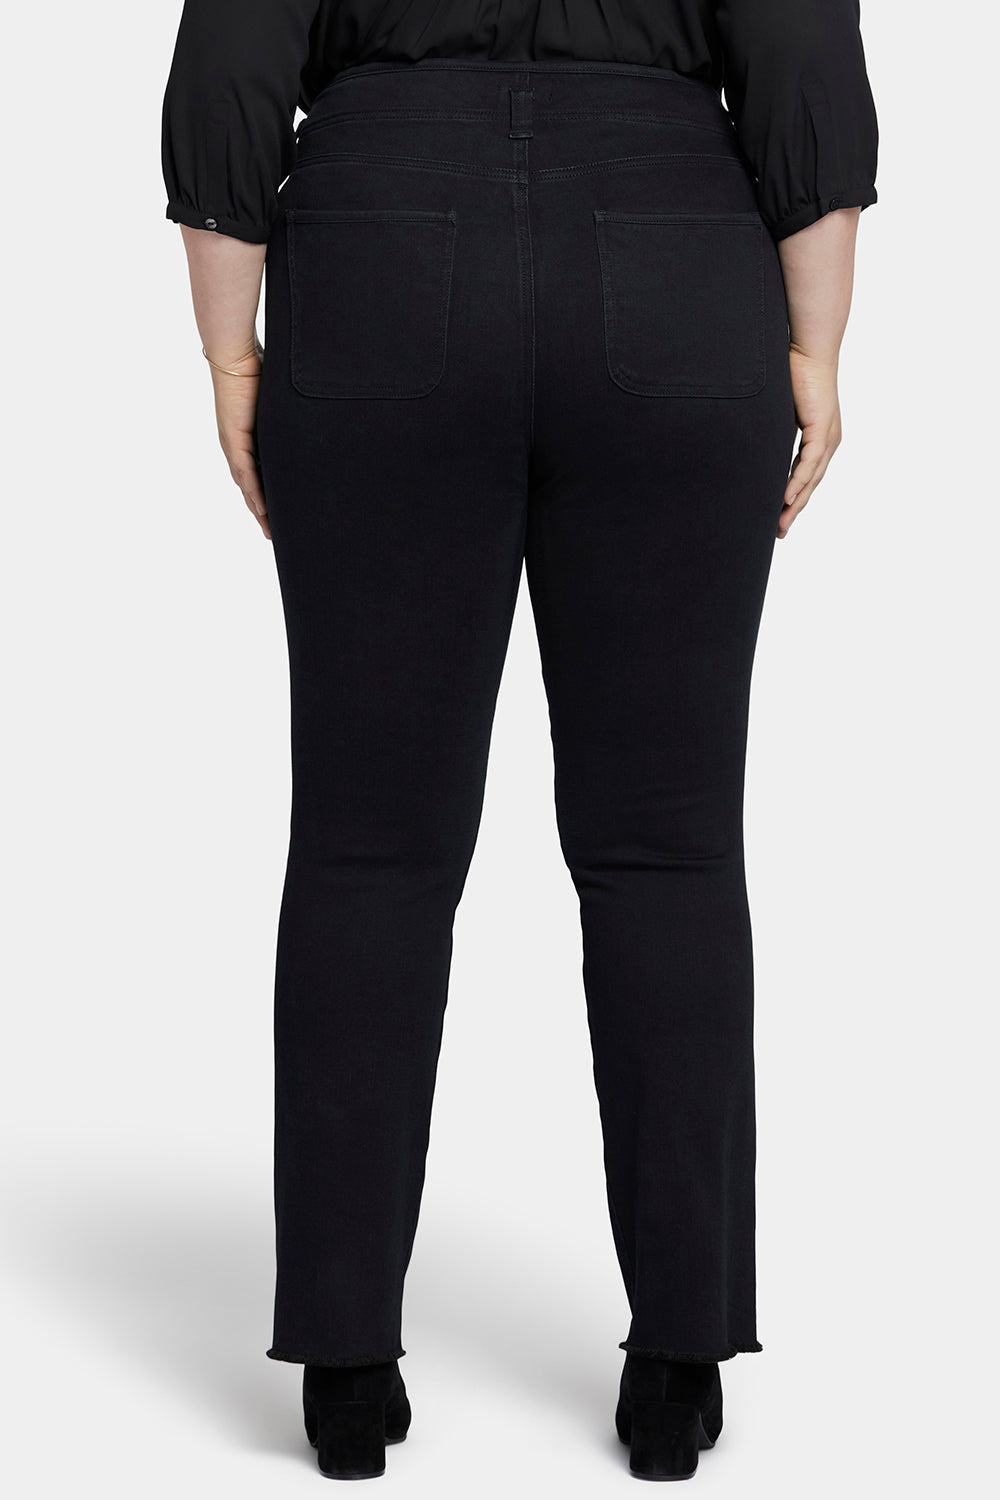 NYDJ Marilyn Straight Jeans In Plus Size With High Rise And Frayed Hems - Huntley